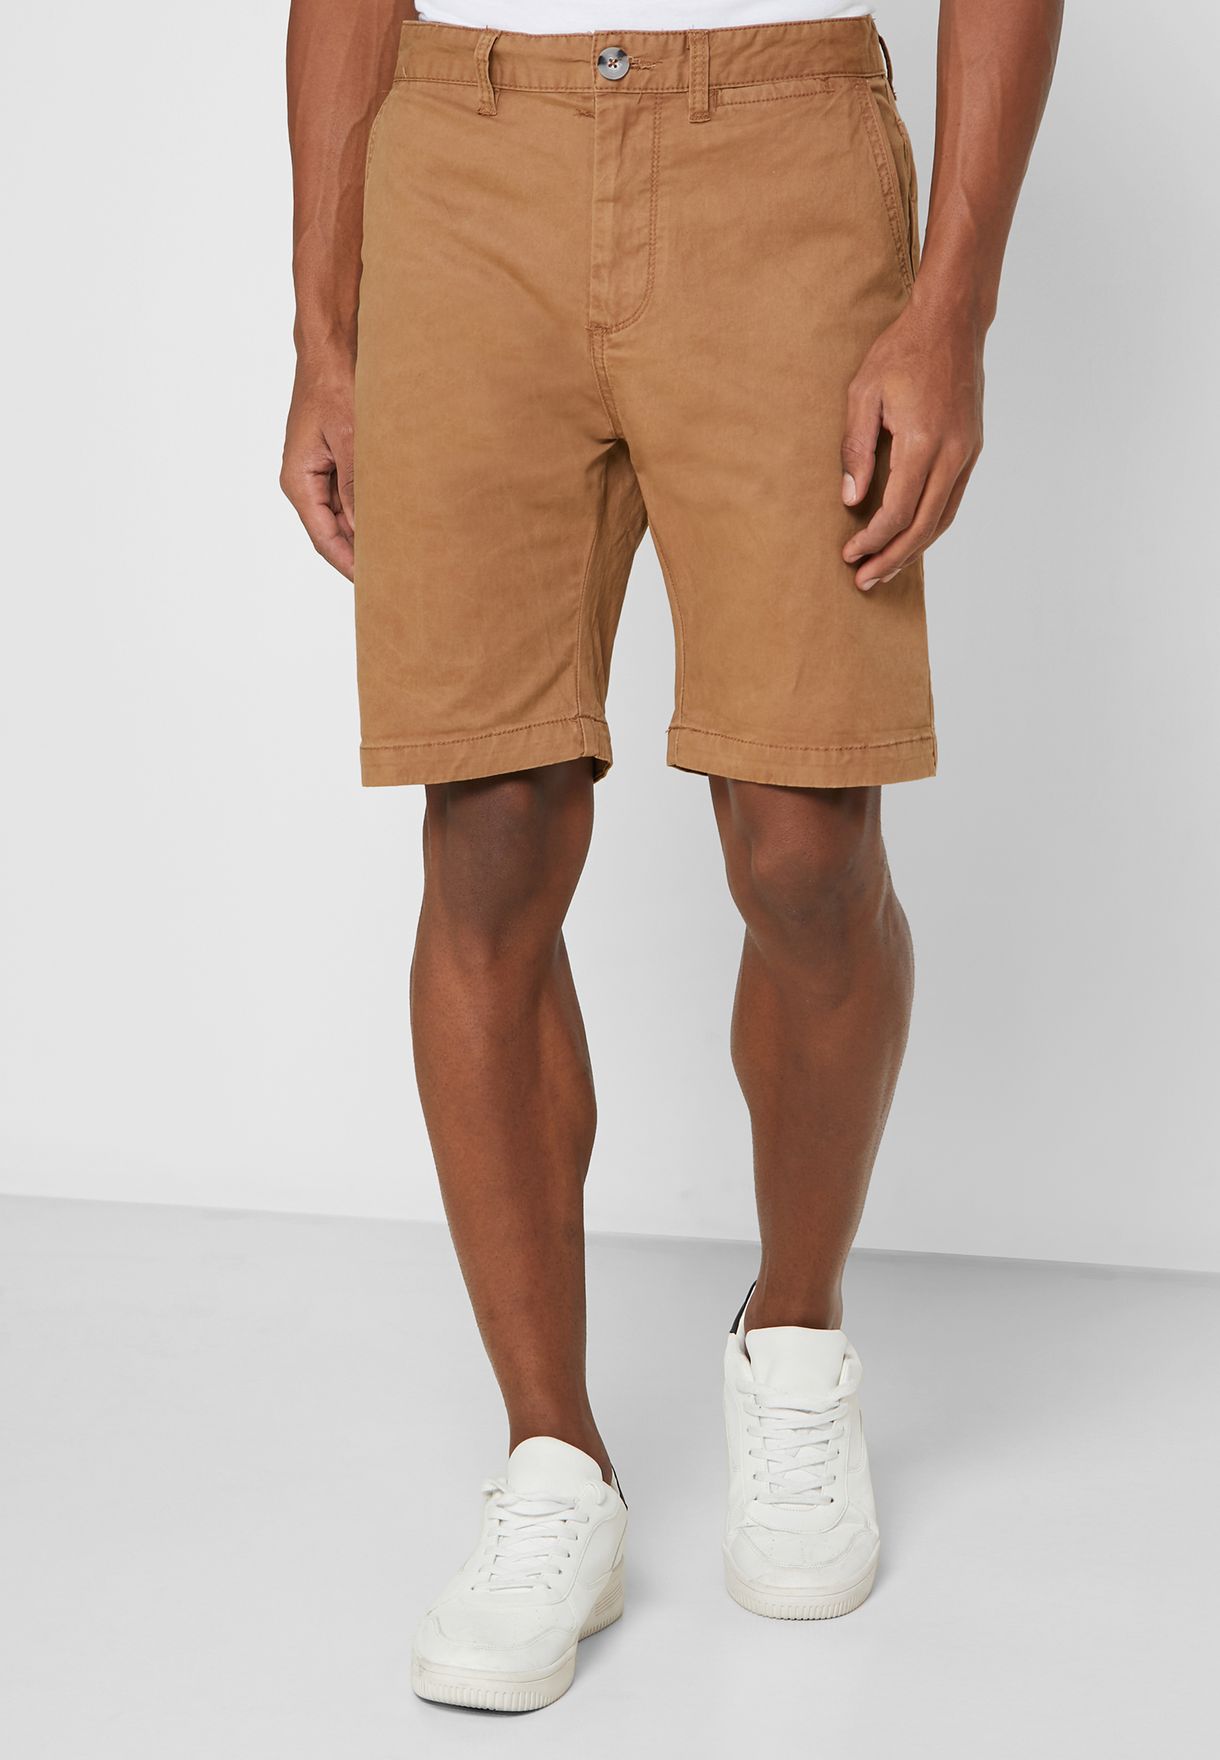 chino shorts with sneakers